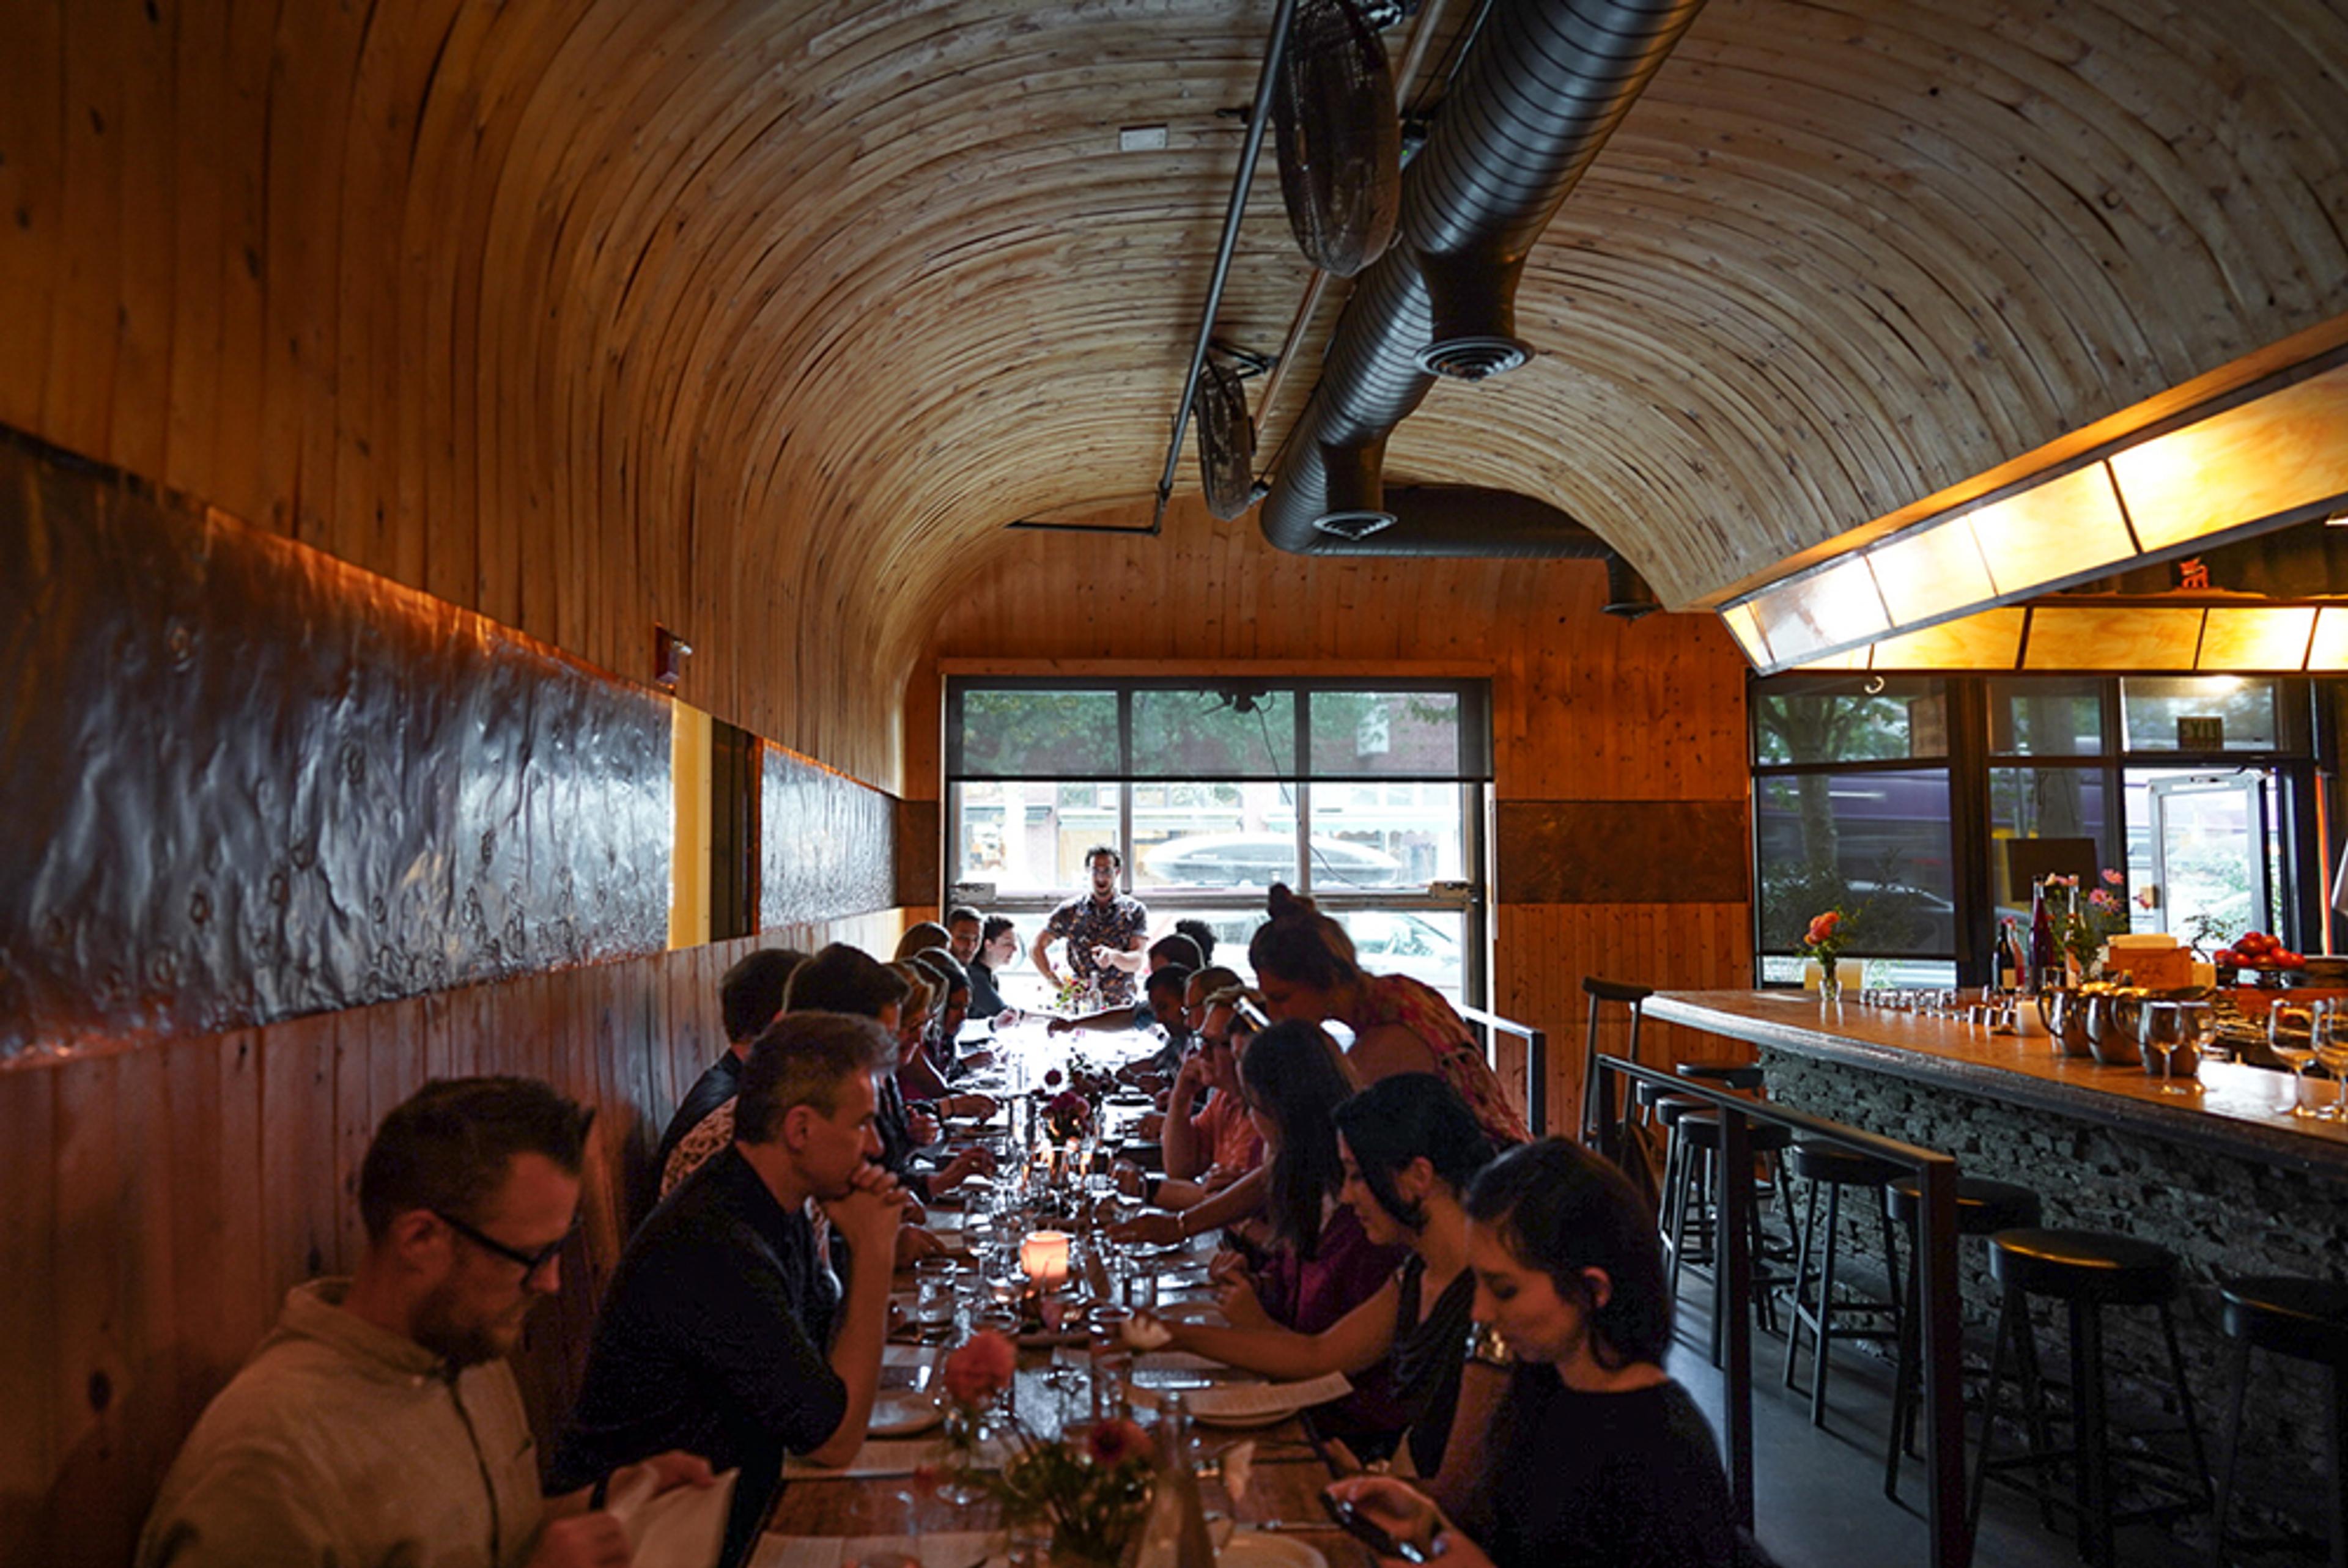 Restaurant interior with curved wood ceilings 